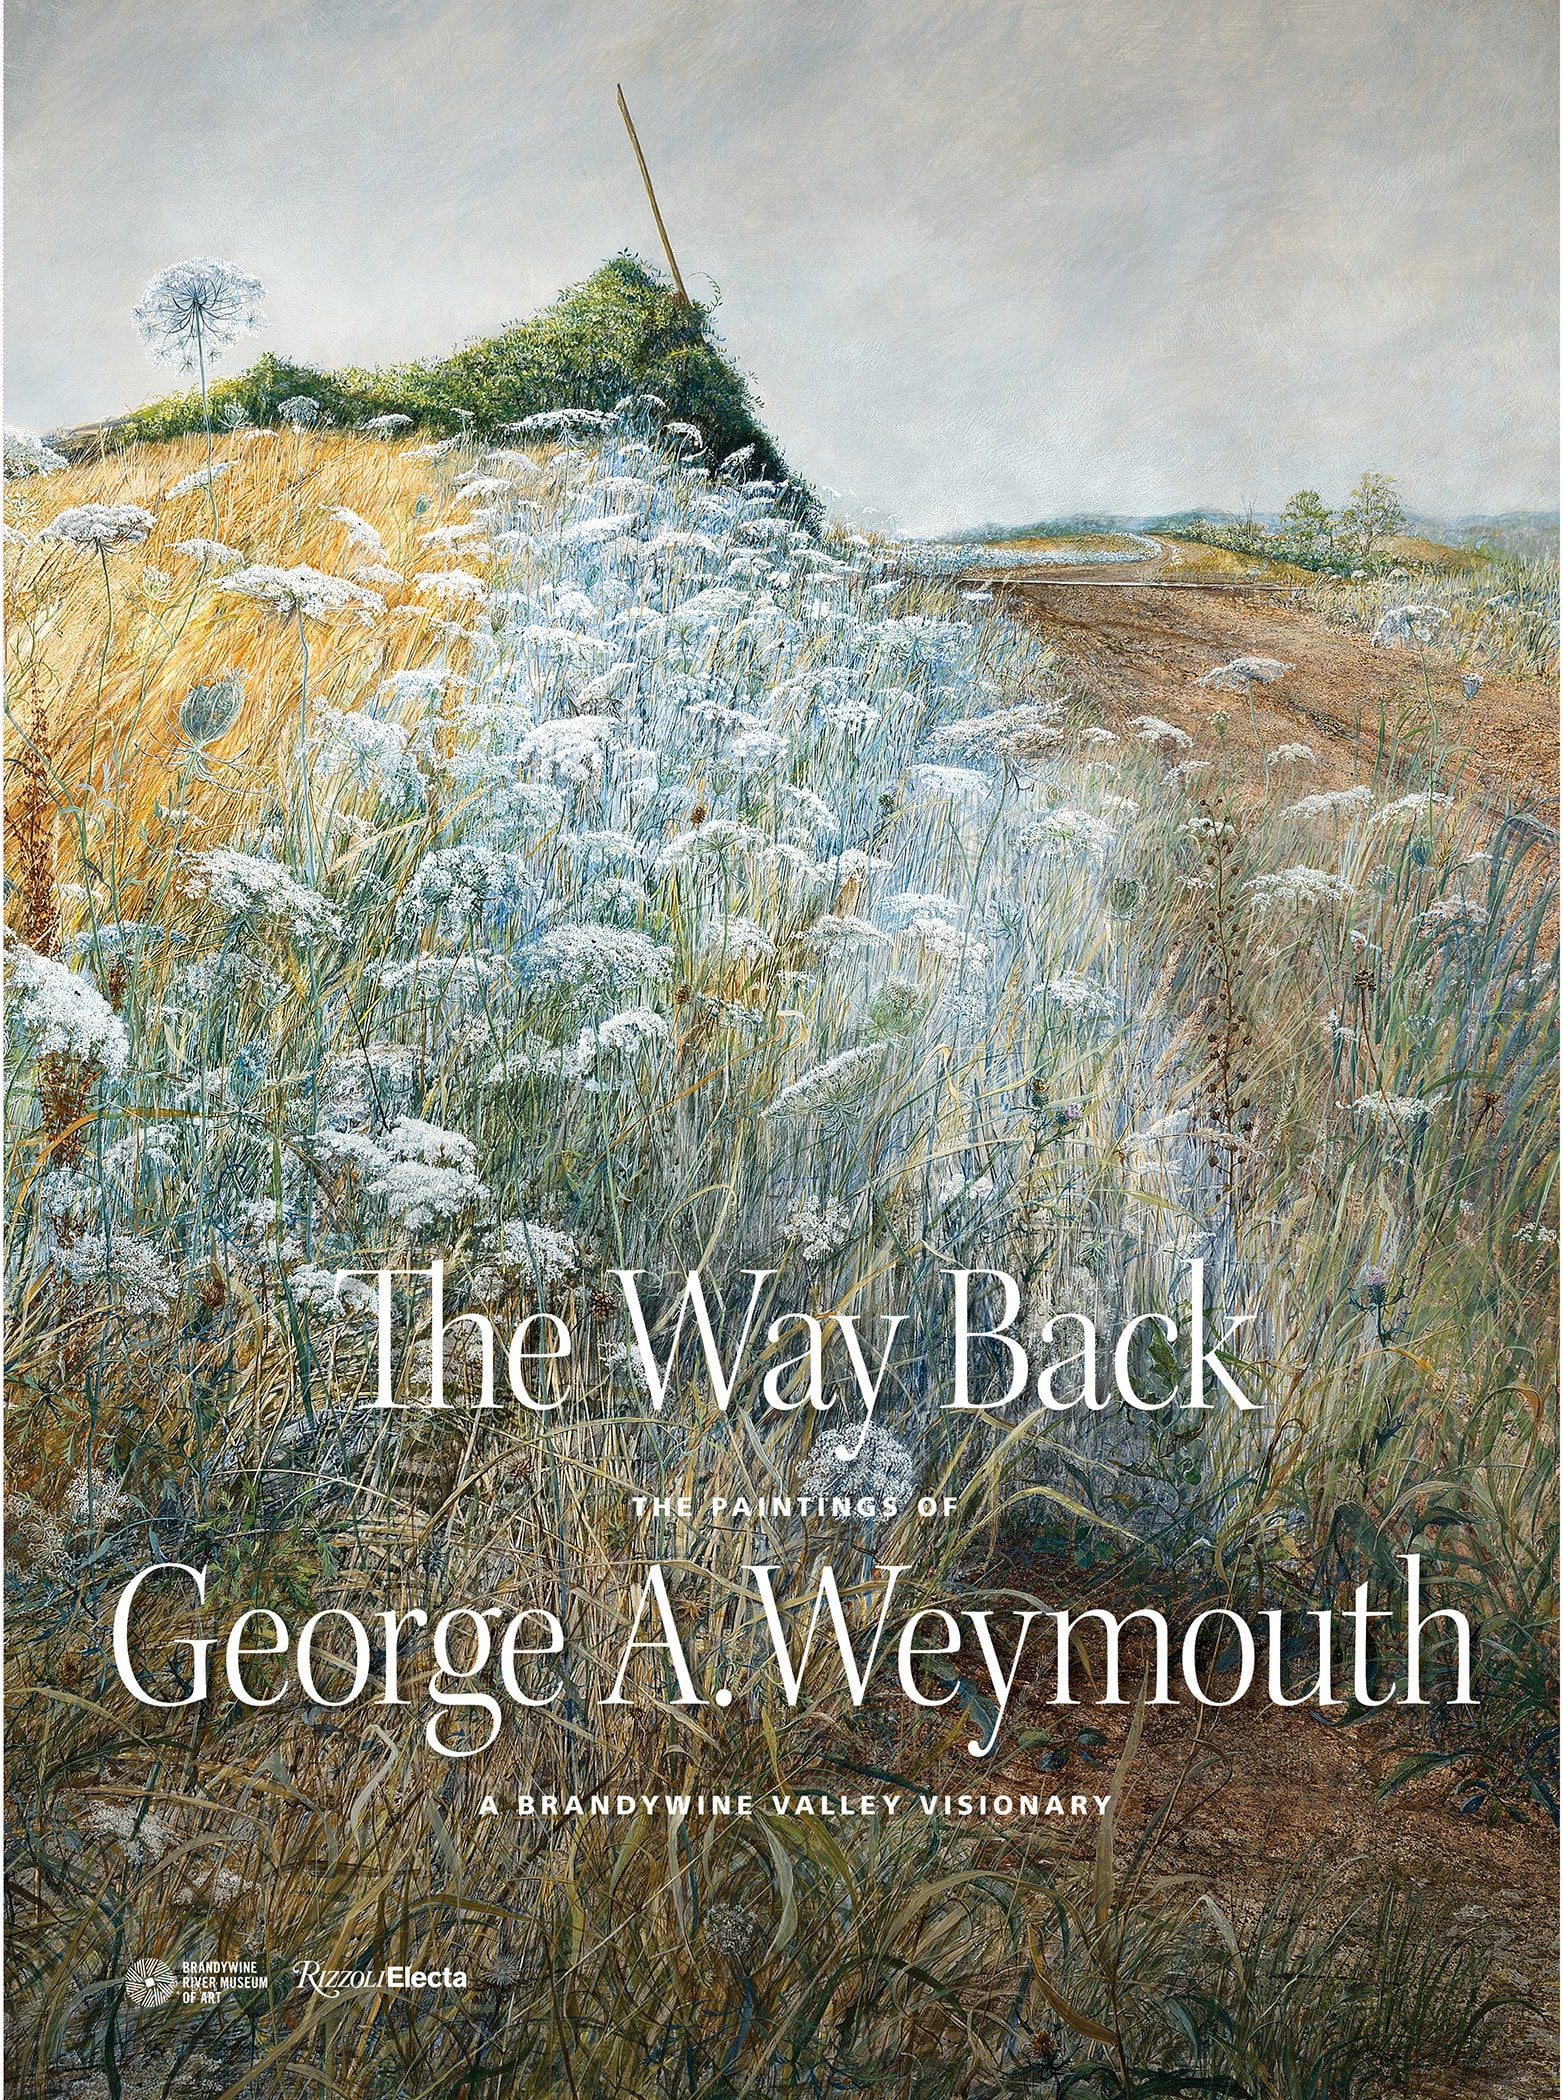 The-Way-Back-The-Paintings-of-George-A-Weymouth--A-Brandywine-Valley-Visionary